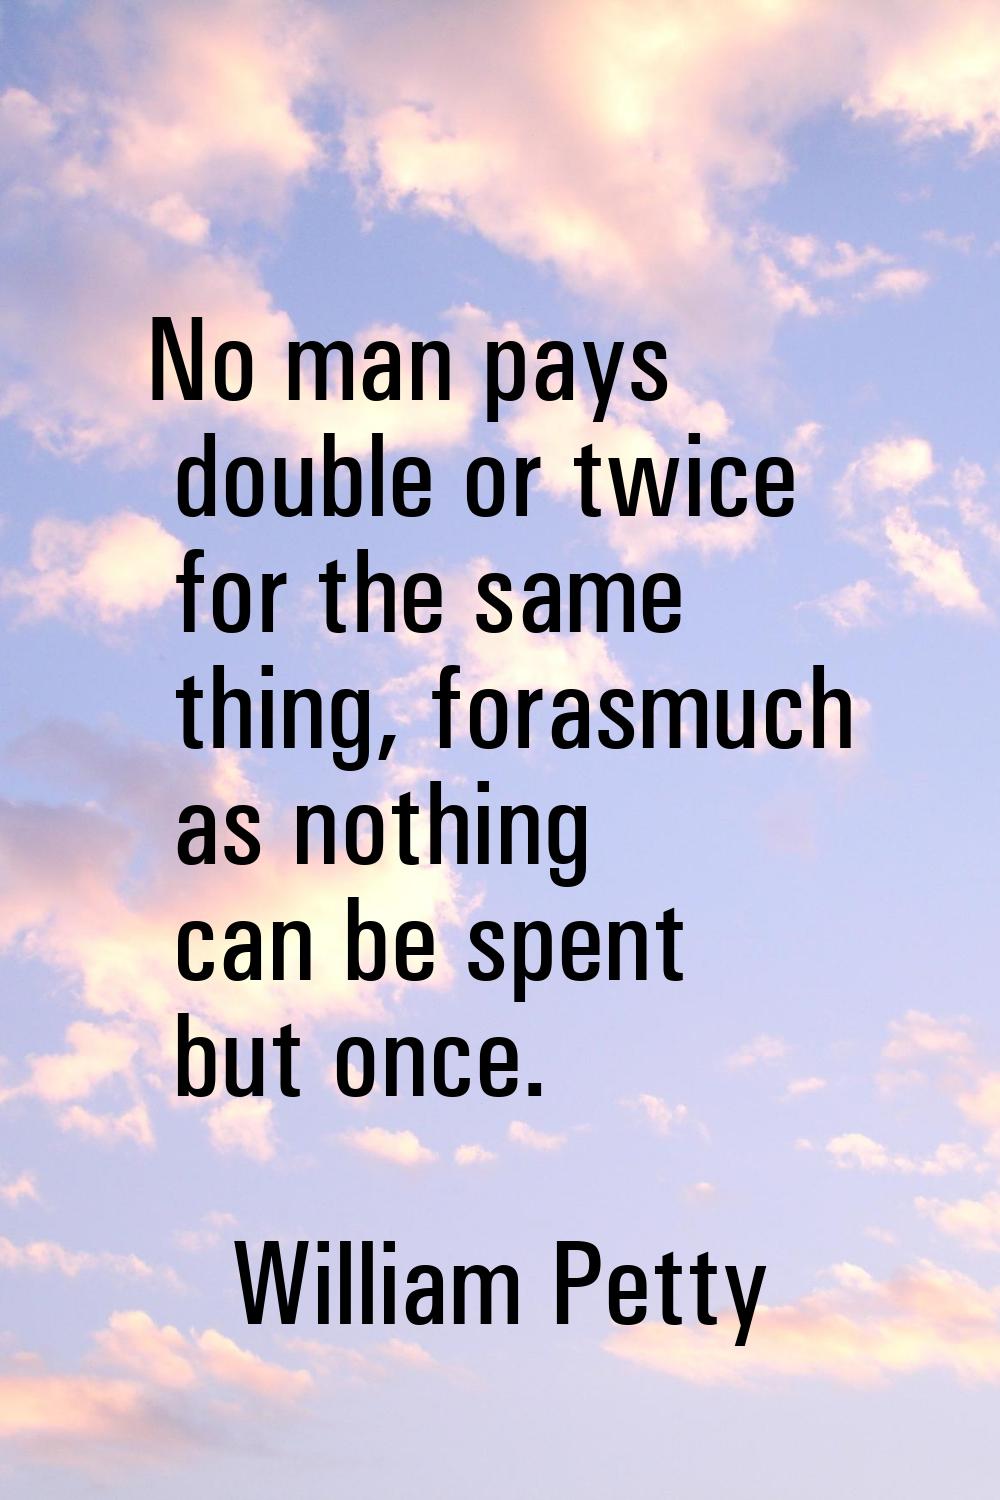 No man pays double or twice for the same thing, forasmuch as nothing can be spent but once.